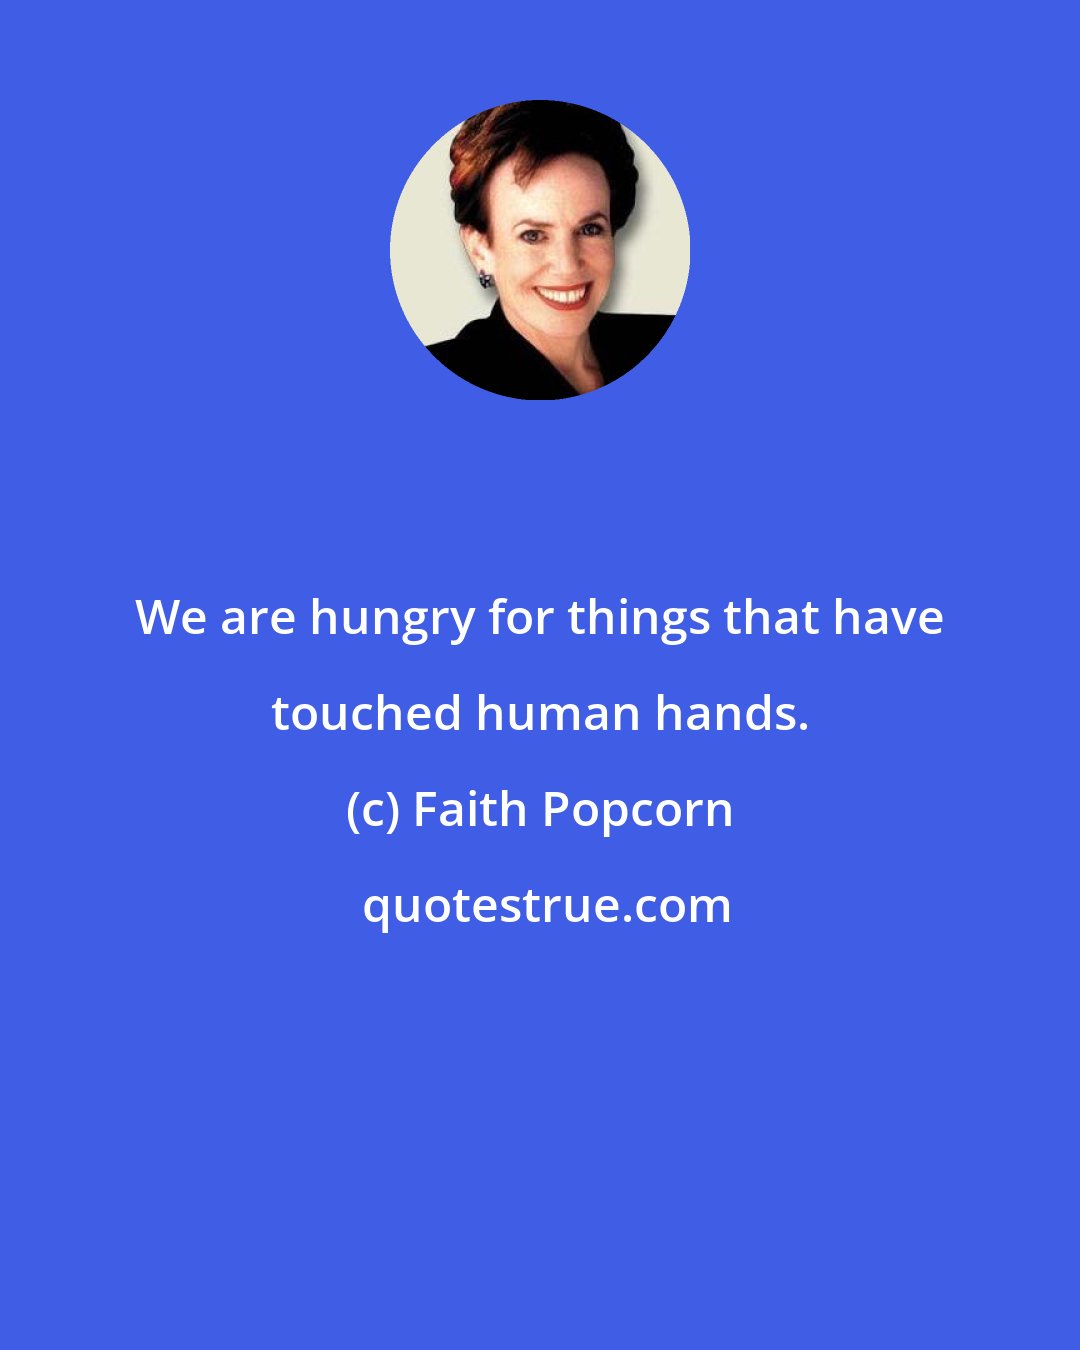 Faith Popcorn: We are hungry for things that have touched human hands.